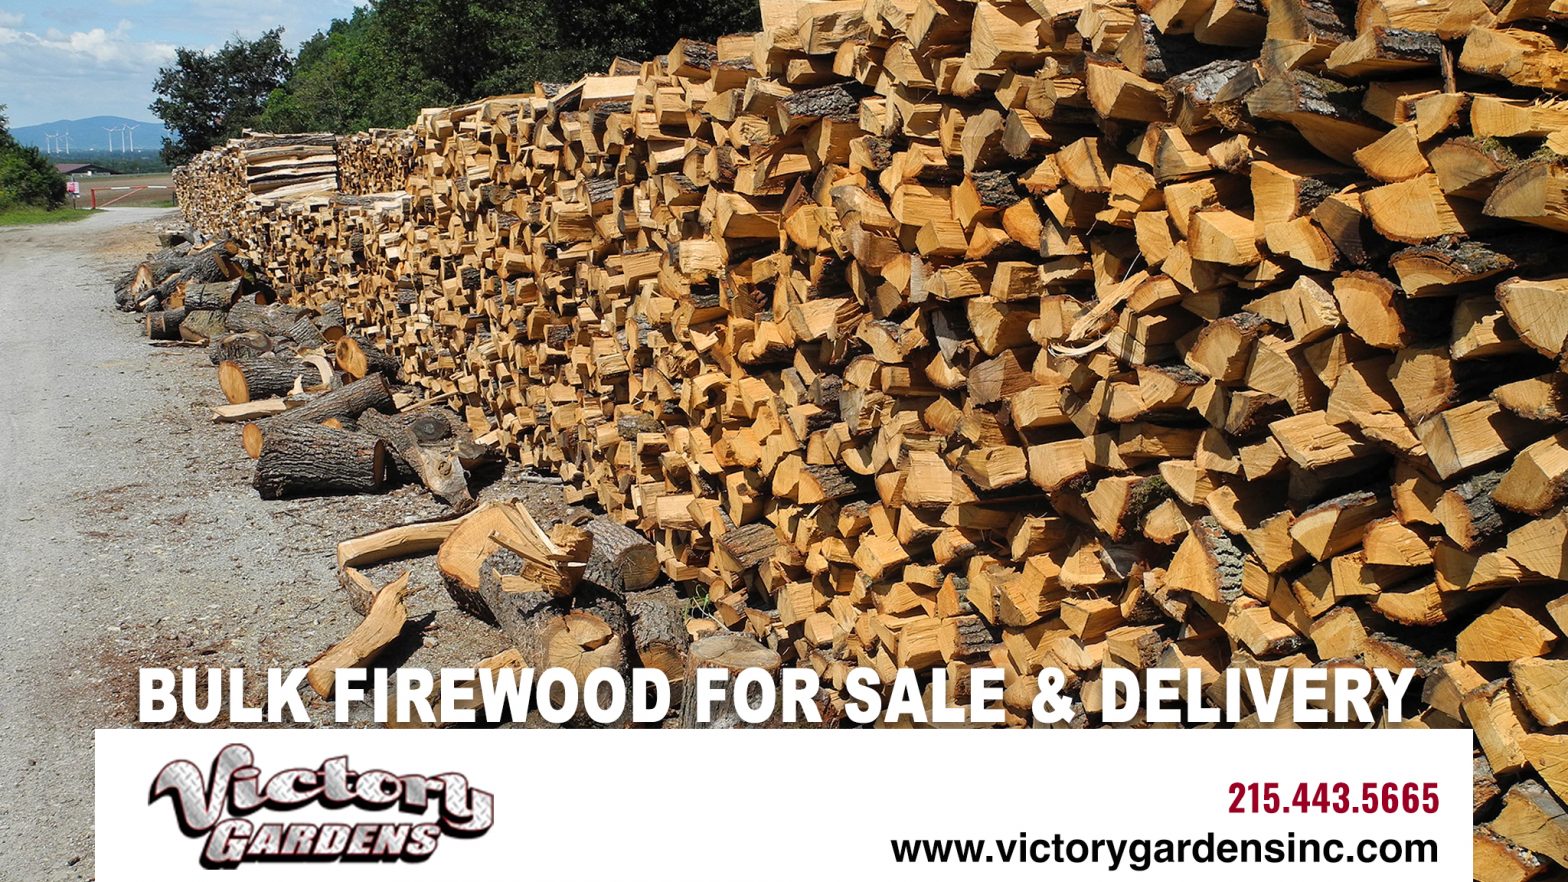 Bulk Firewood For Sale & Delivery